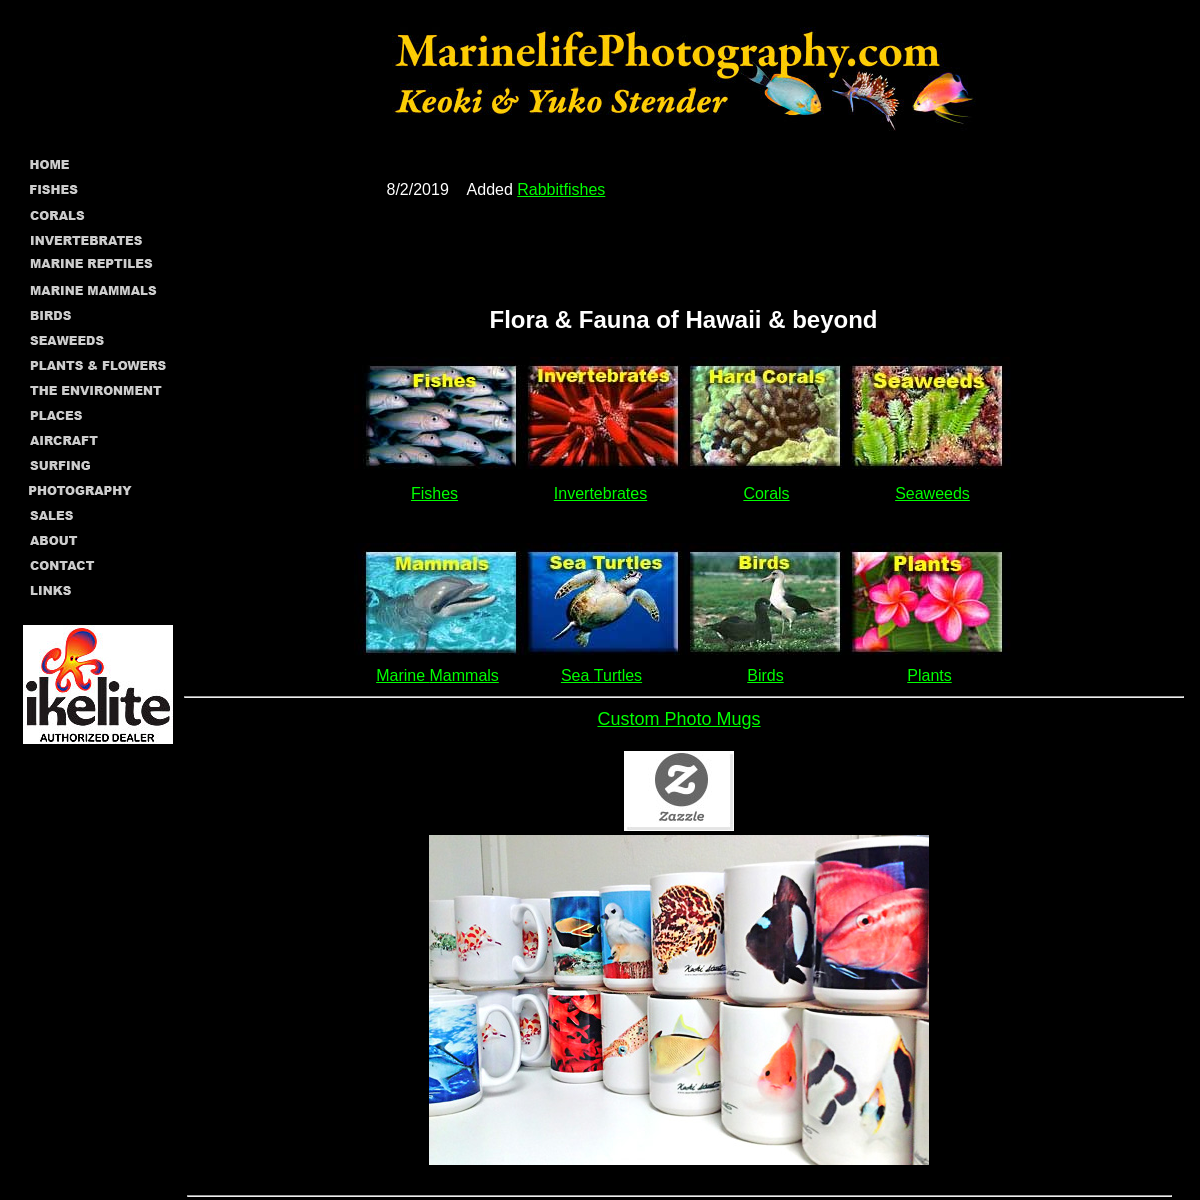 A complete backup of marinelifephotography.com